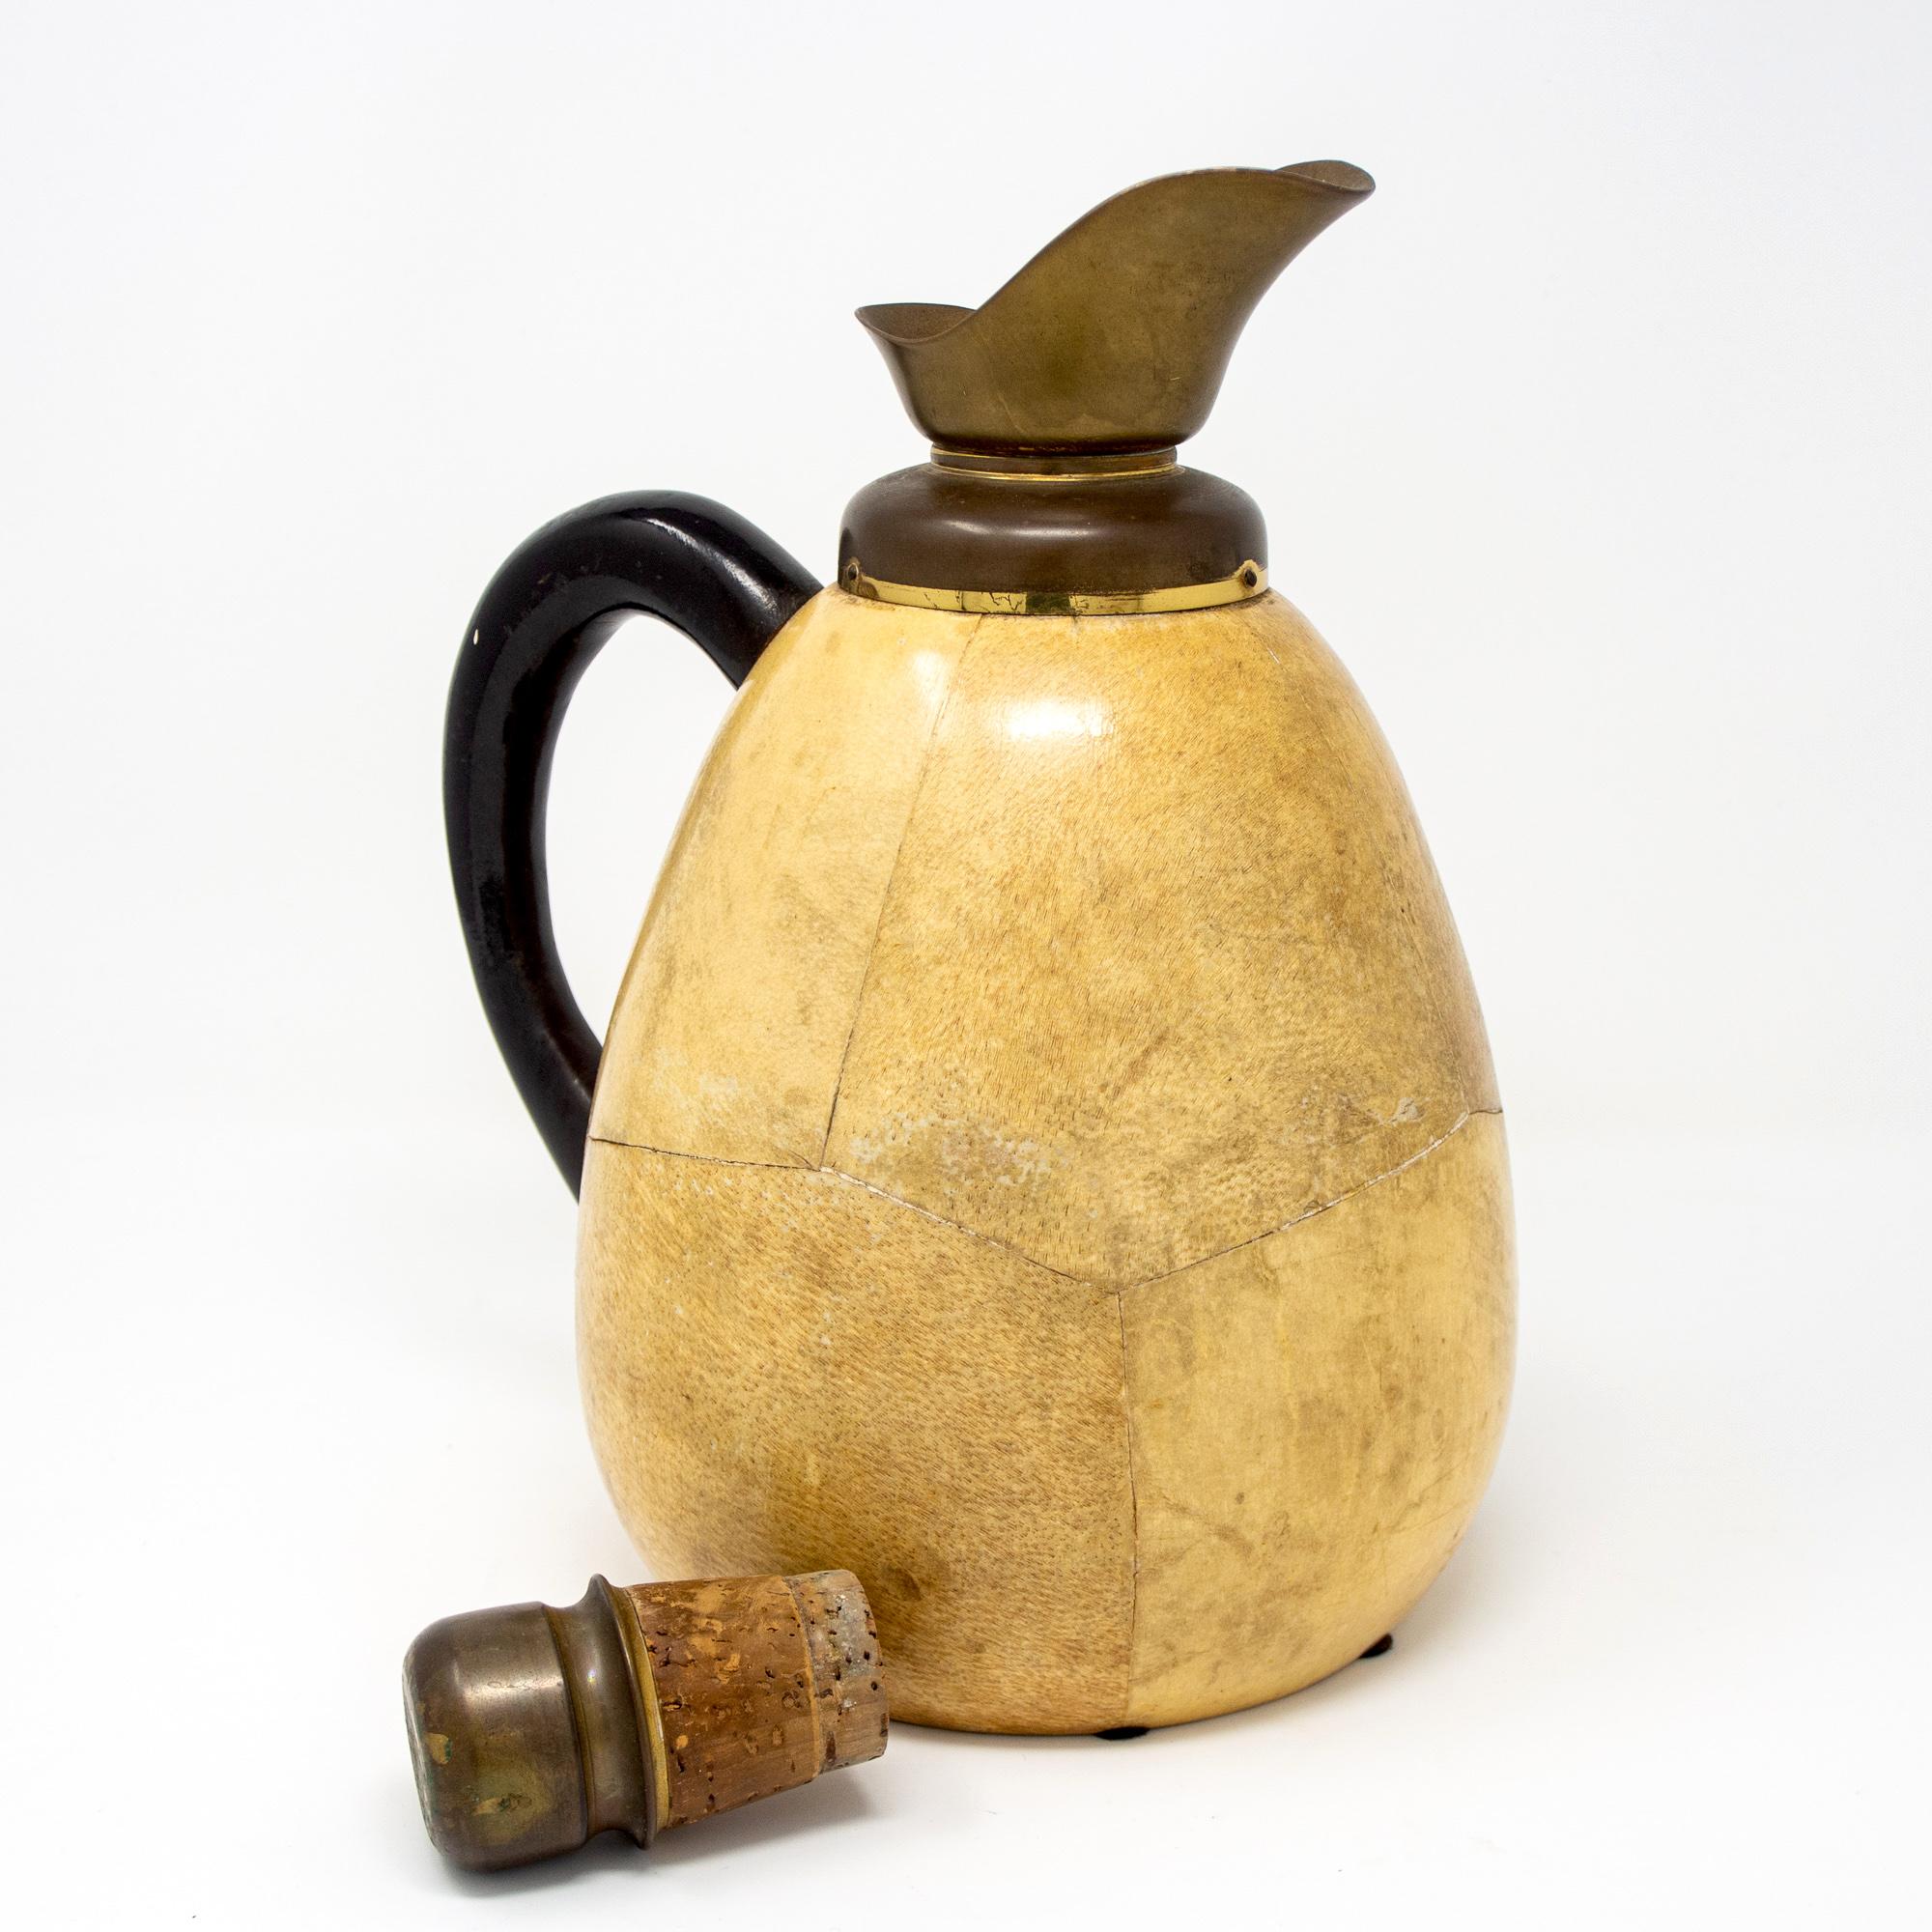 Aldo Tura for Macabo Vellum and Brass Pitcher 1